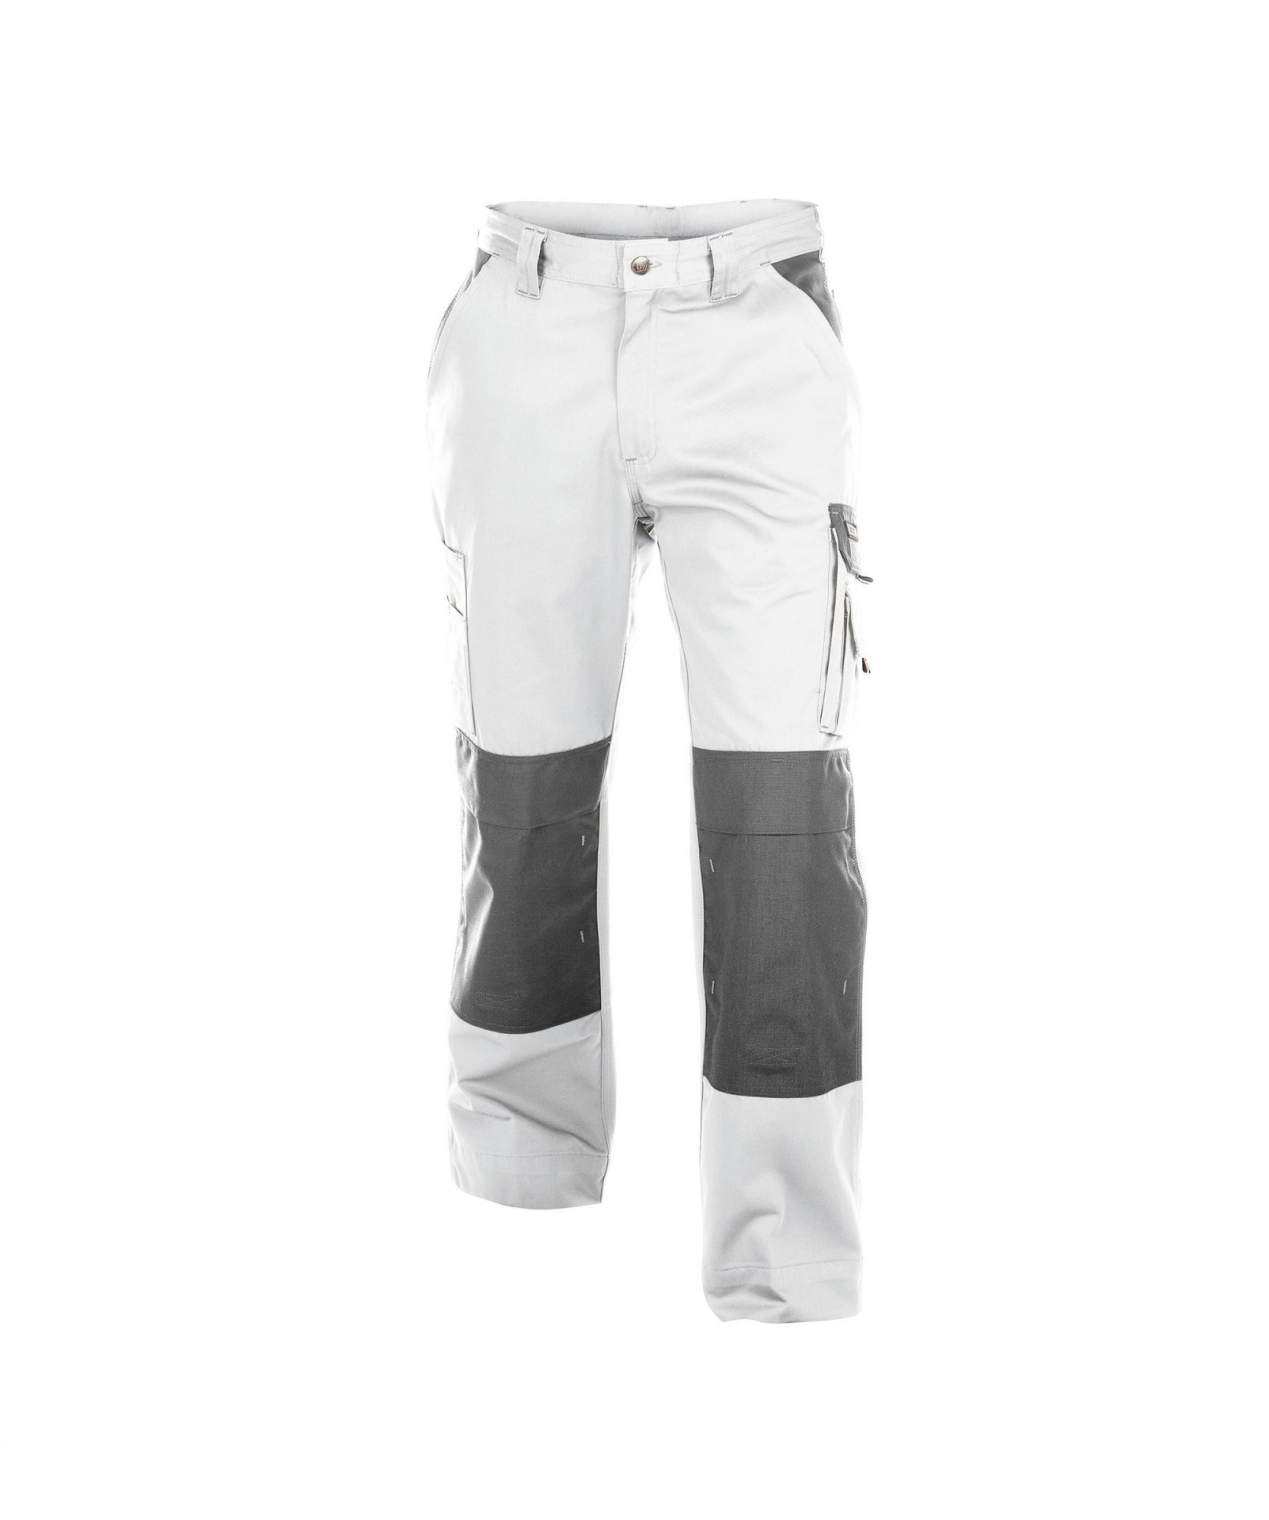 boston two tone work trousers with knee pockets white cement grey front